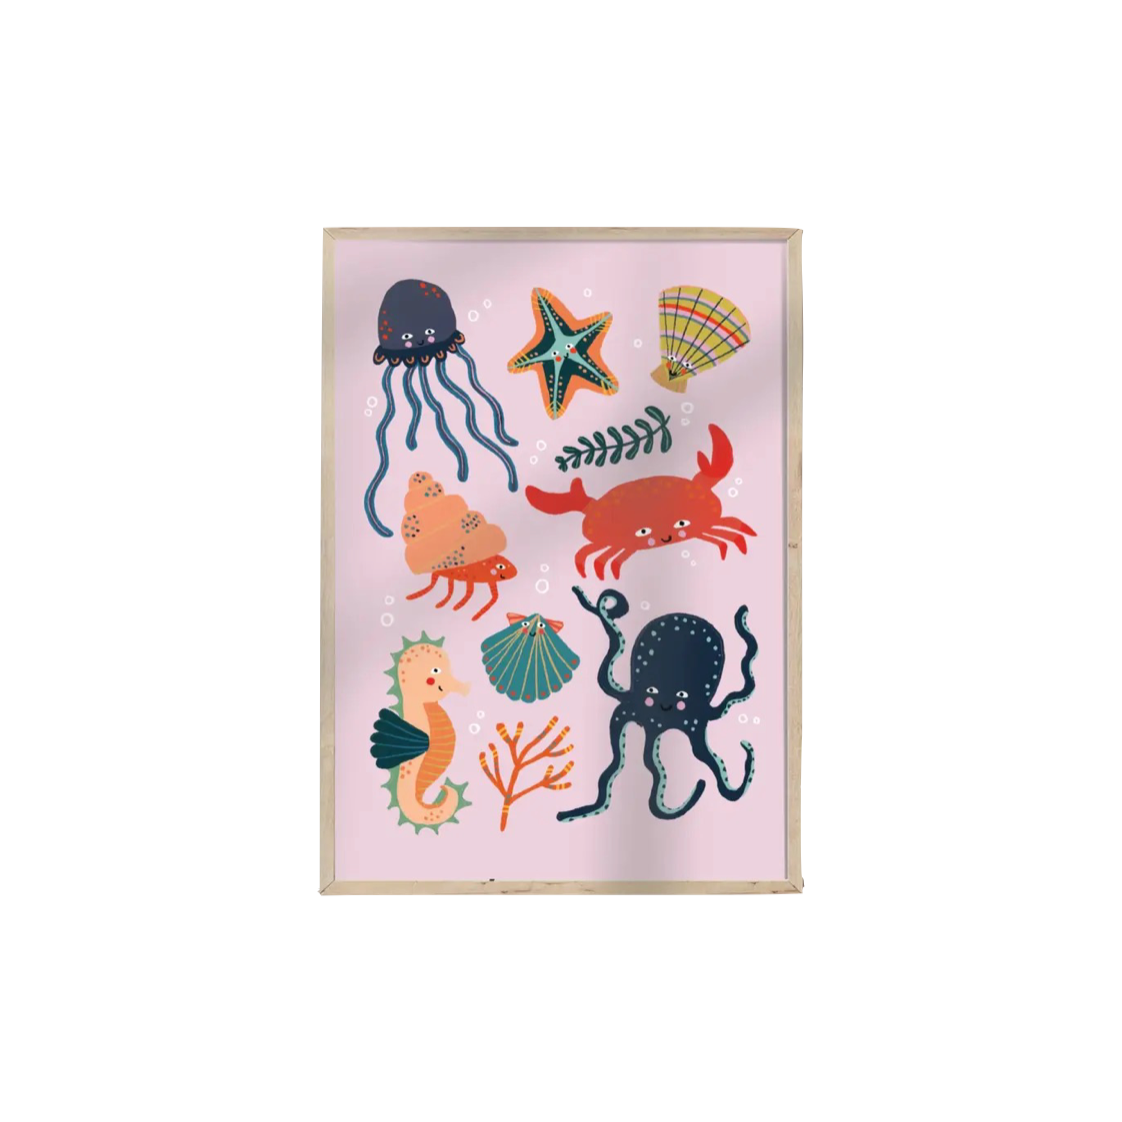 children's print with colourful characters including a crab, seahorse, octopus starfish and much more